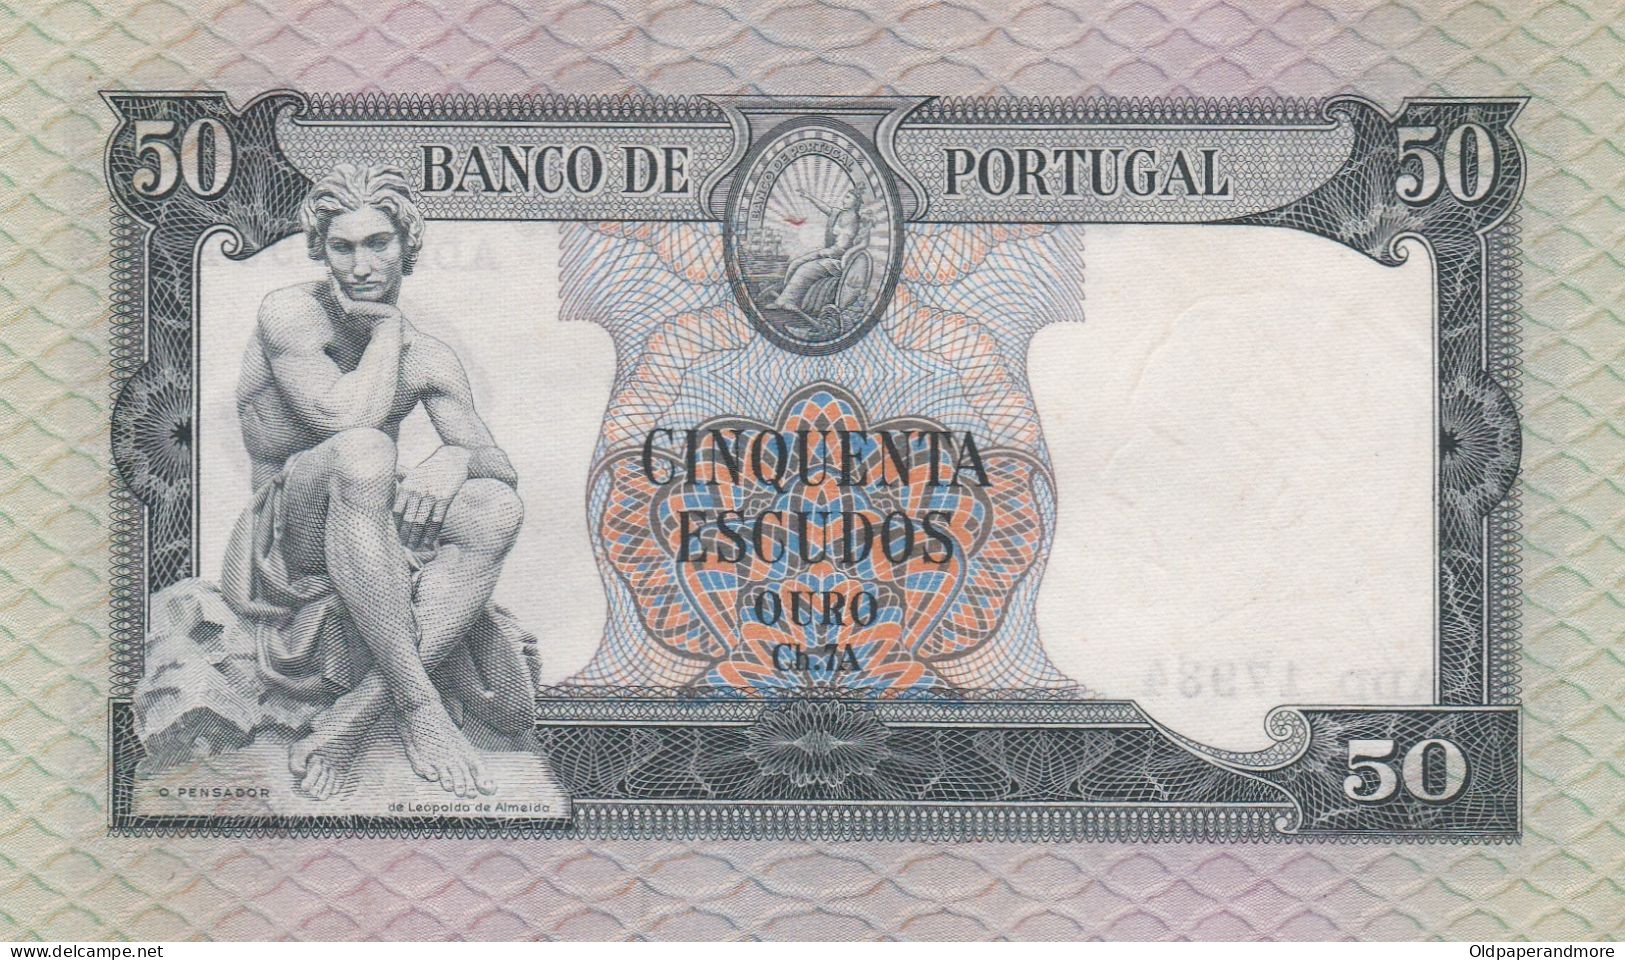 PORTUGAL BANK NOTE - BANKNOTE - 50$00 - CH 7 A   - 24/07/1950 USED - Portugal